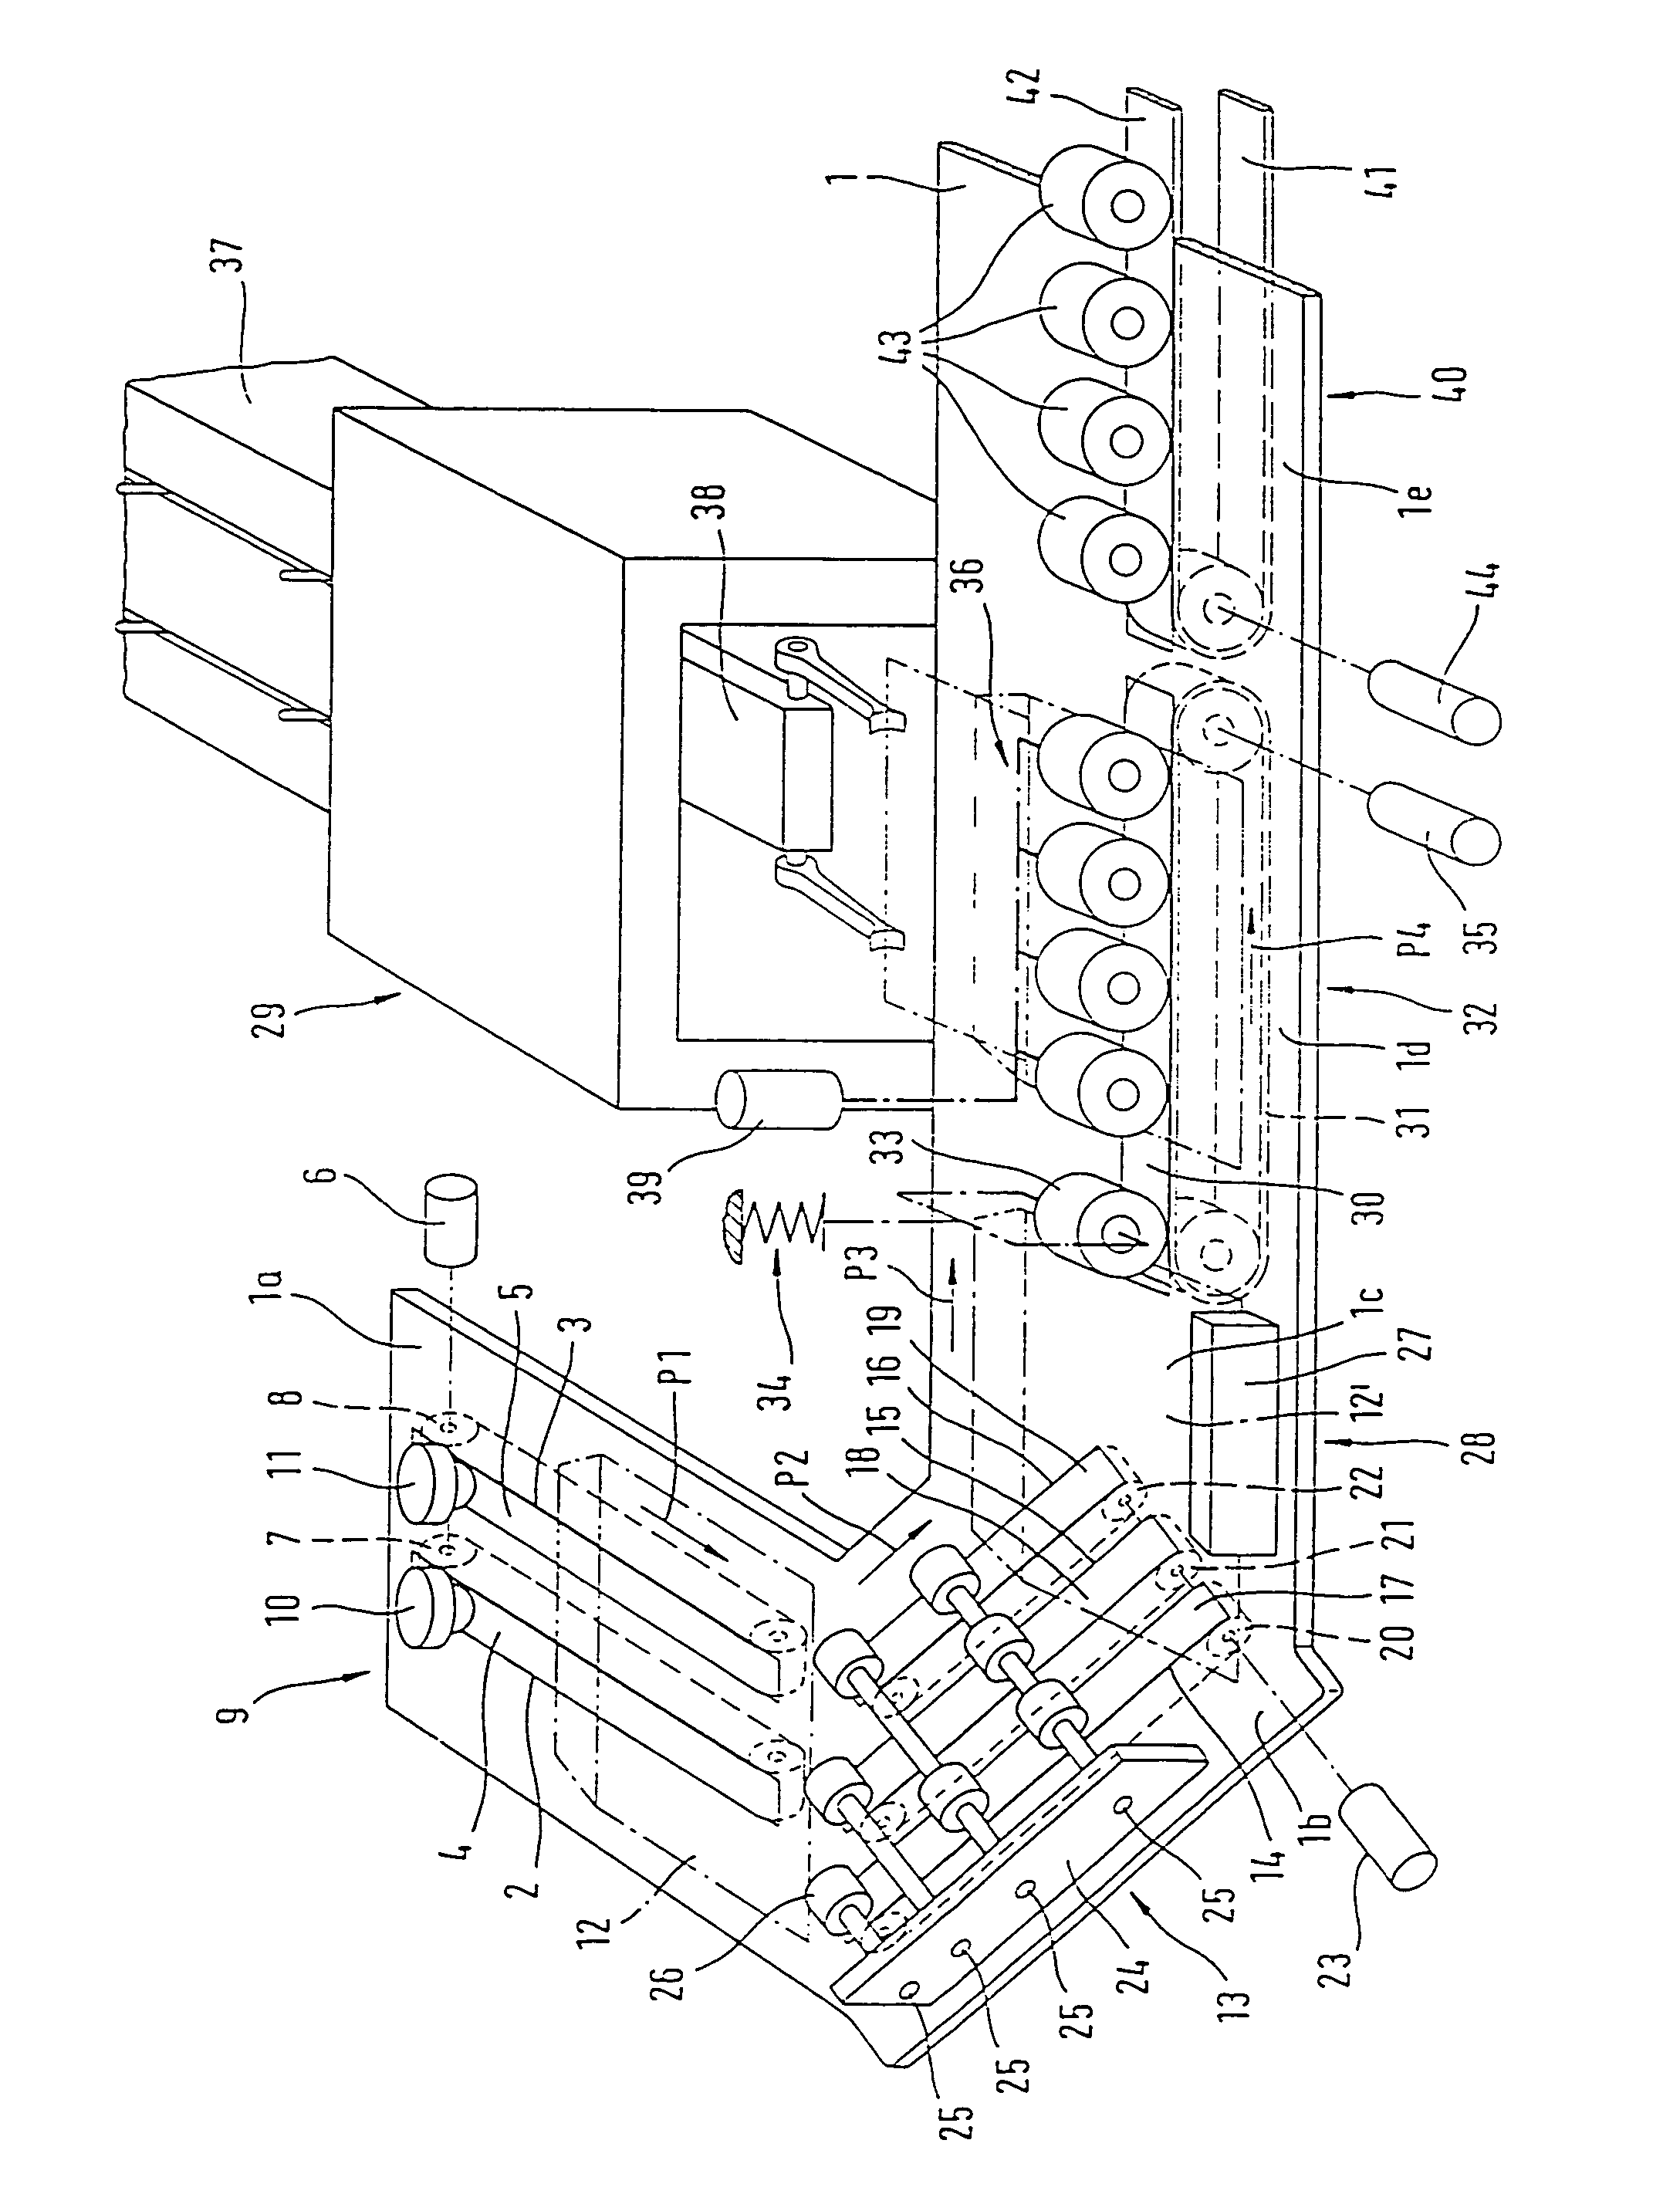 Envelope-filling station for mail processing systems